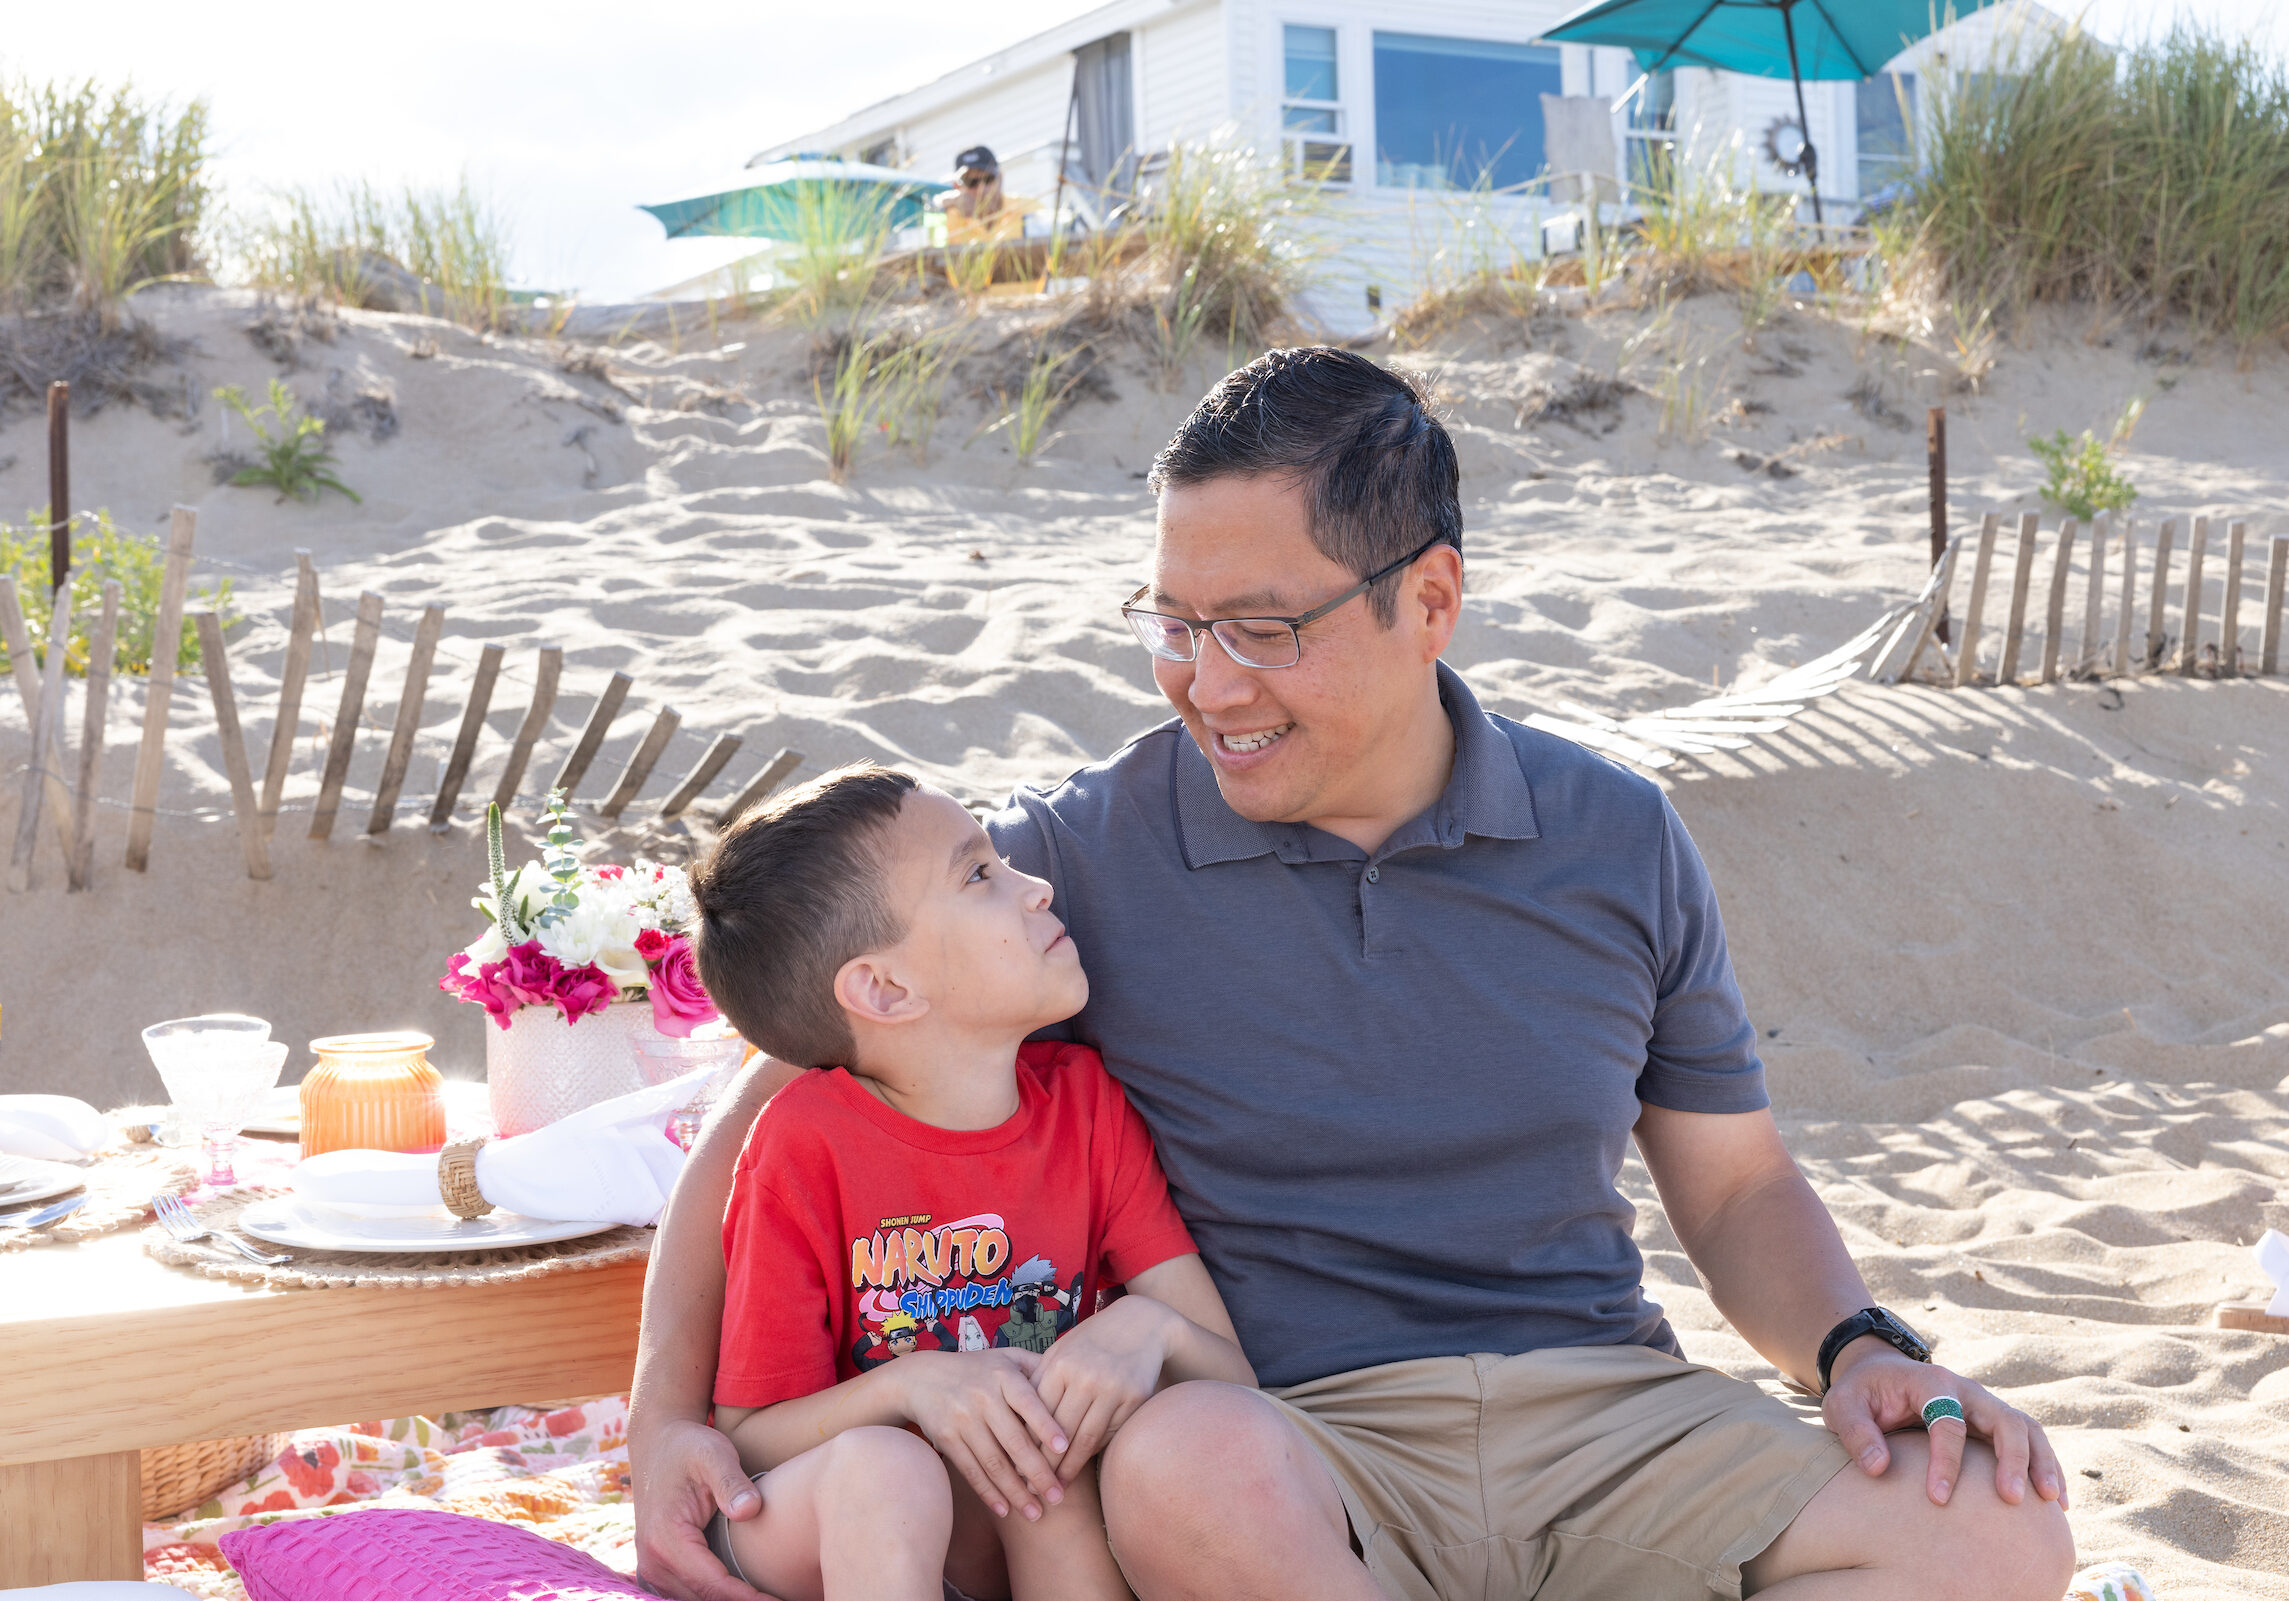 Image of a father and son from the funded families beach day photoshoot.